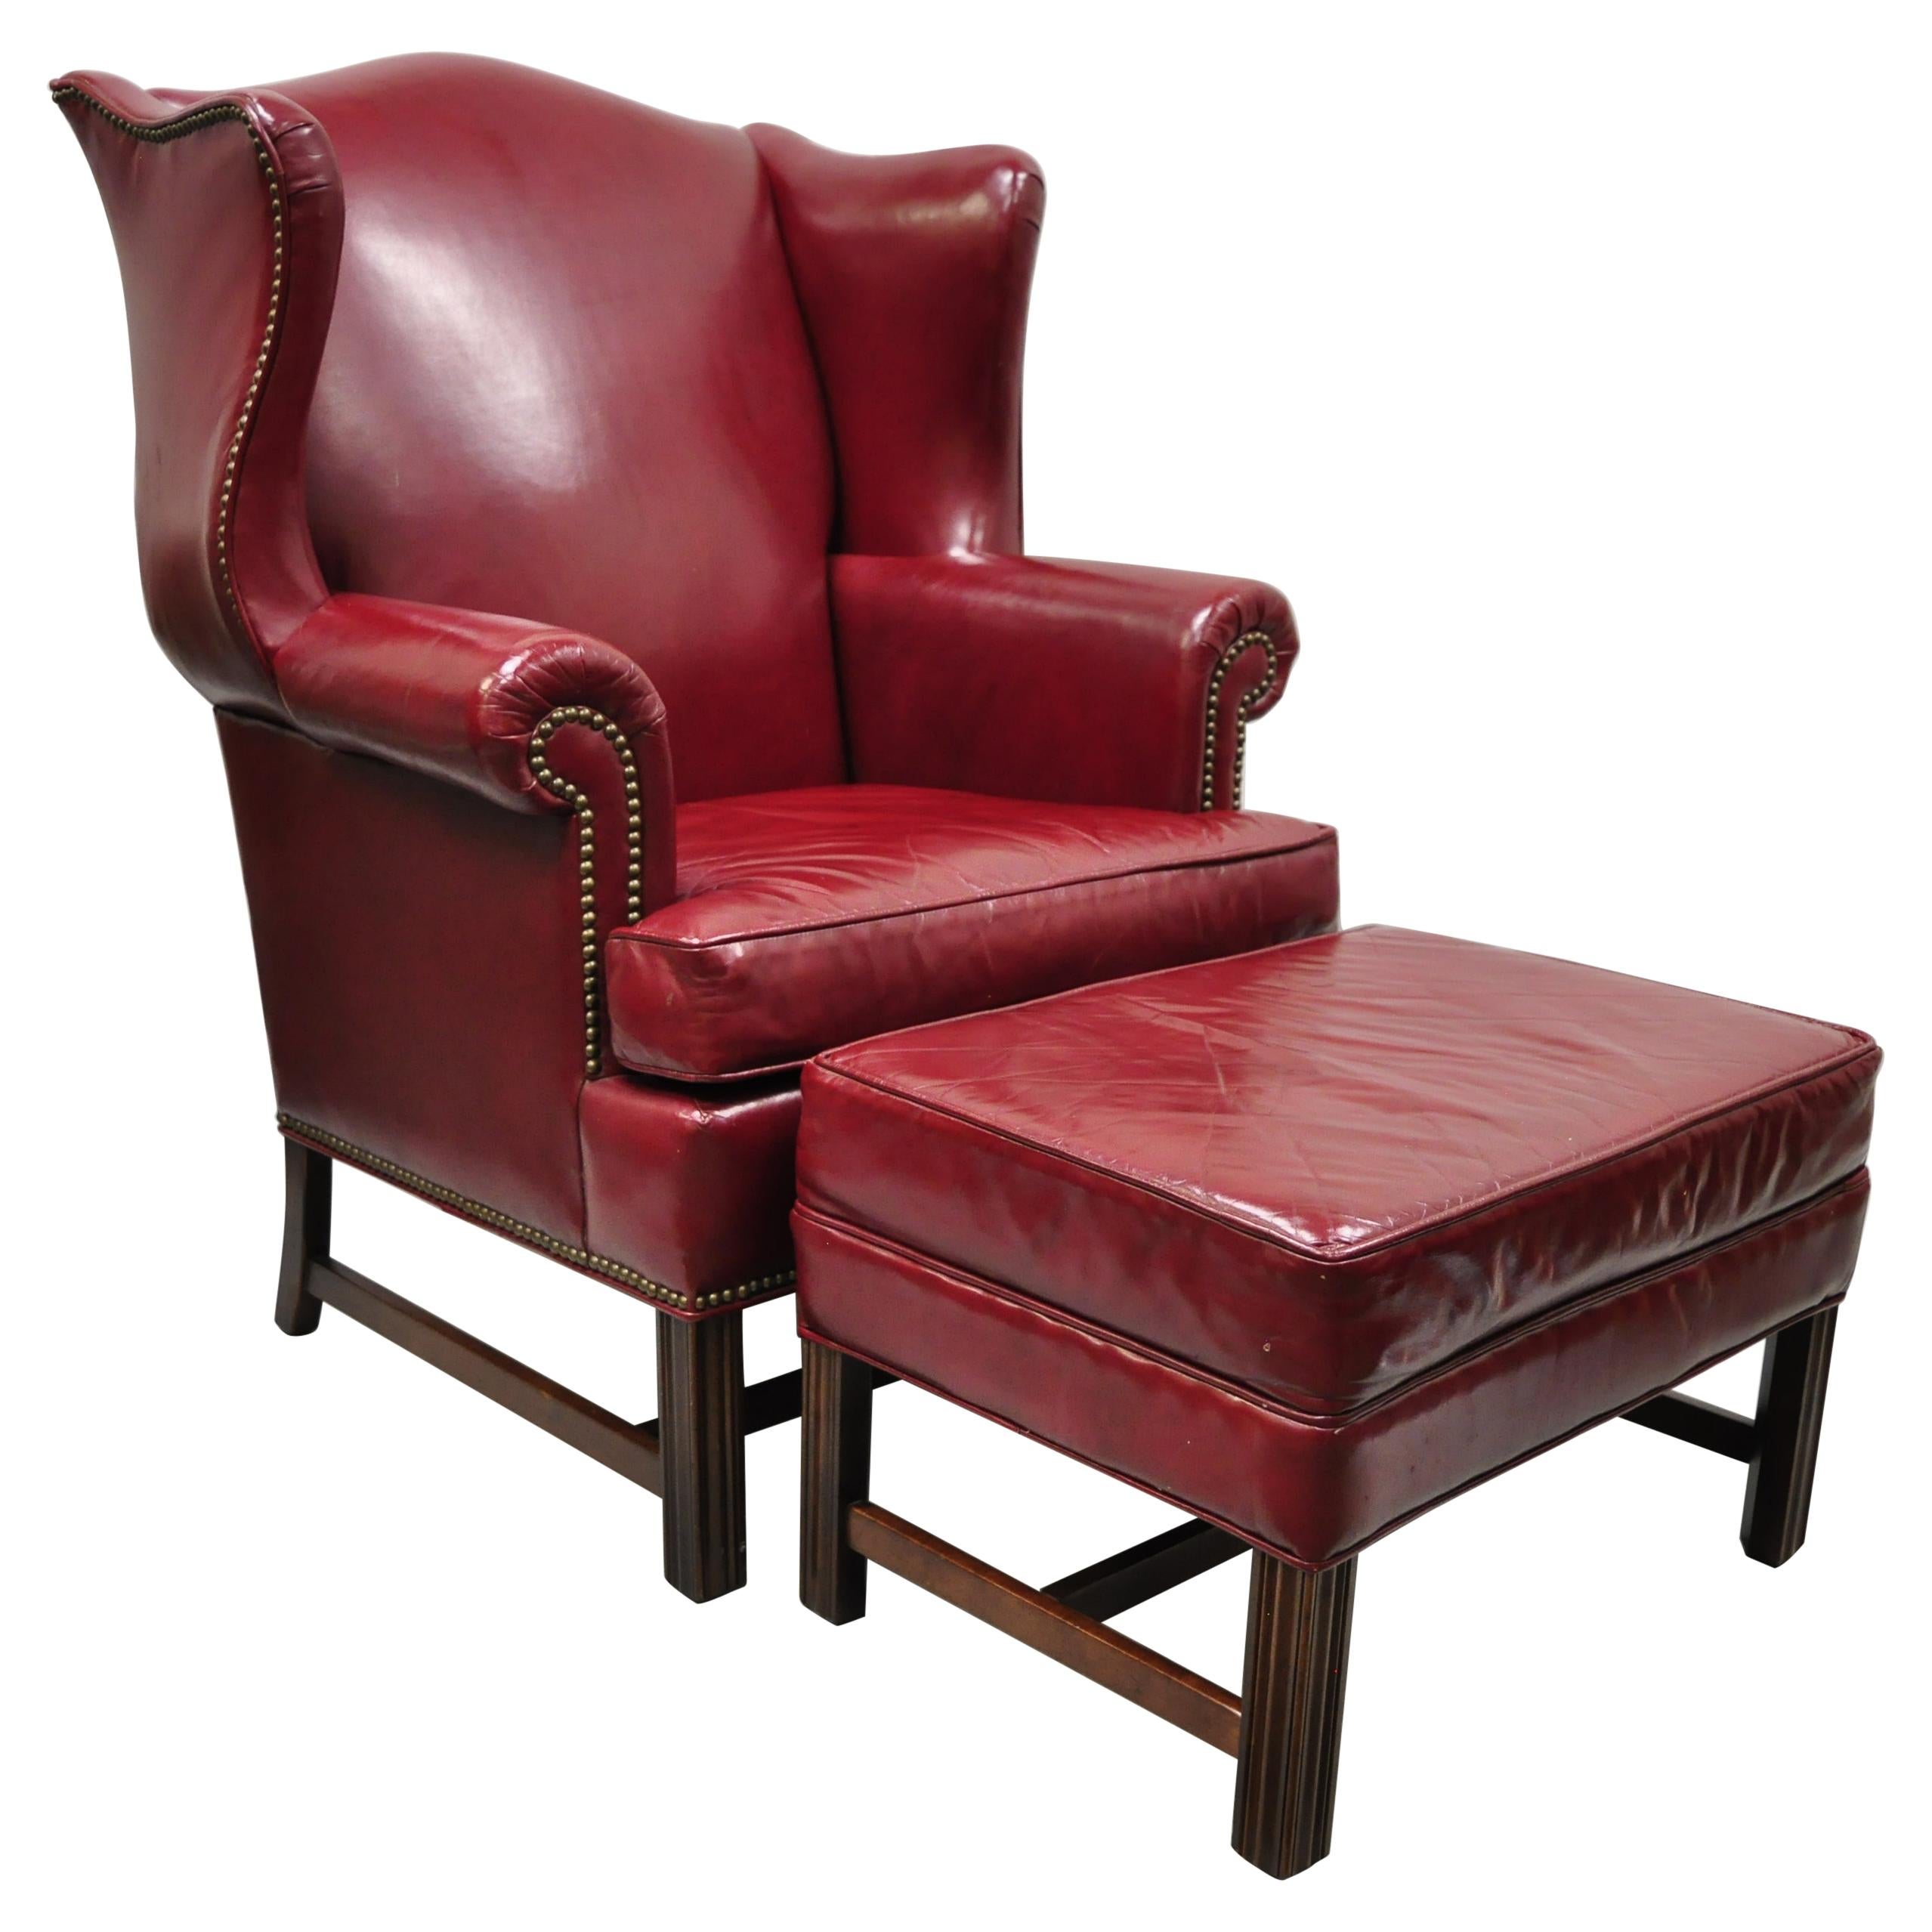 Ethan Allen English Georgian Burgundy Red Leather Wingback Lounge Chair Ottoman